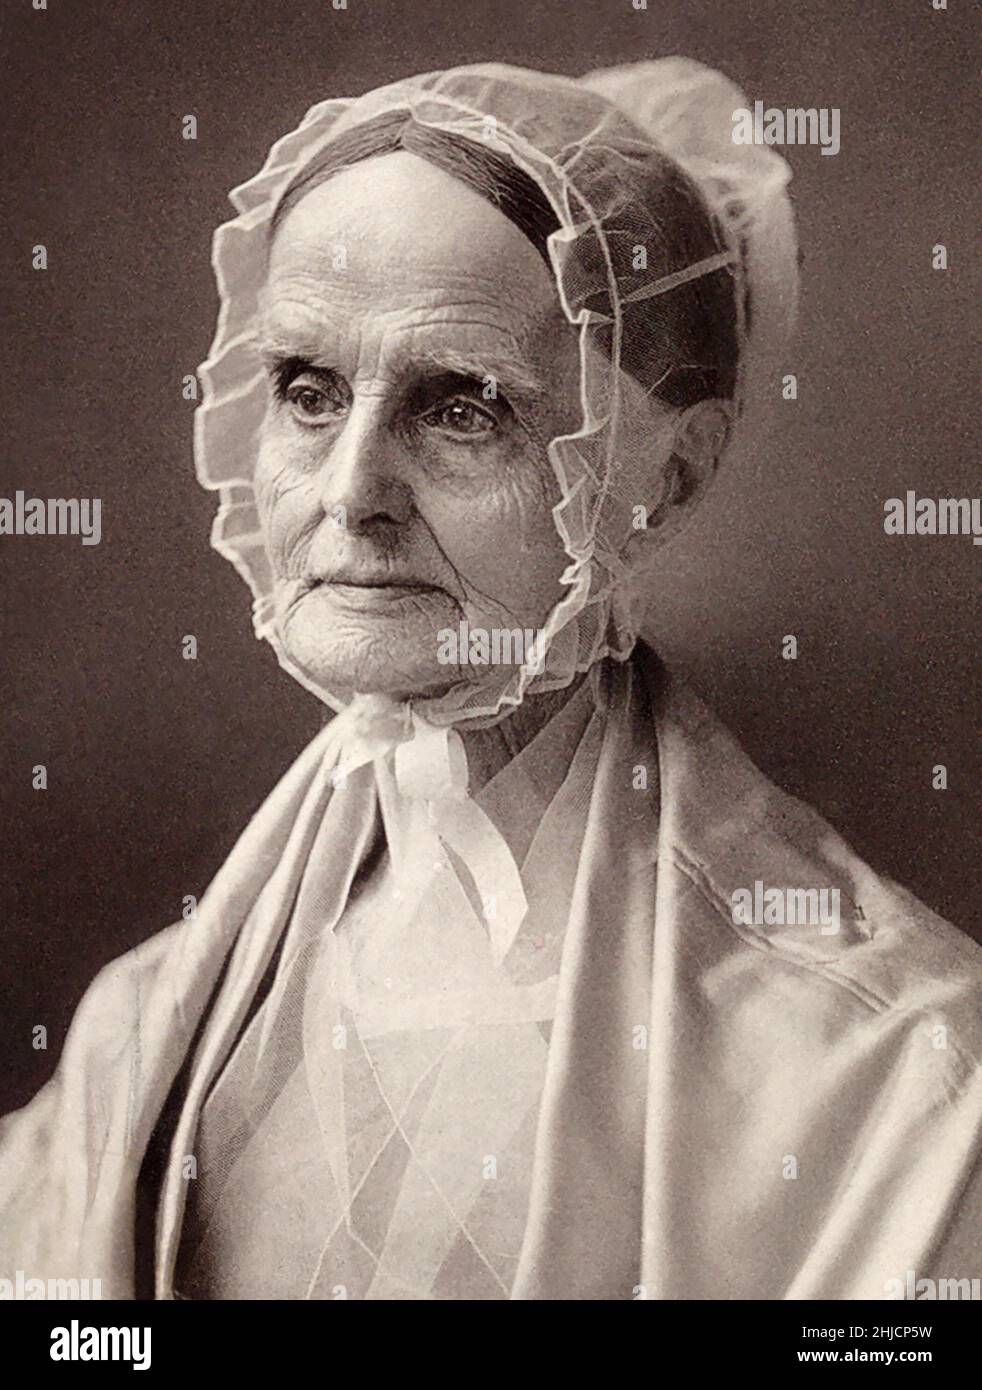 Lucretia Mott (1793-1880) was an American Quaker, abolitionist, women's rights activist, and social reformer. She was inspired to fight for women's rights when she was excluded with other women from the World Anti-Slavery Convention held in London in 1840. In 1848 she was one of the leaders of the Seneca Falls Convention, the first women's rights convention in the US. Photographed by F. Gutekunst in Philadelphia, circa 1870s. Stock Photo